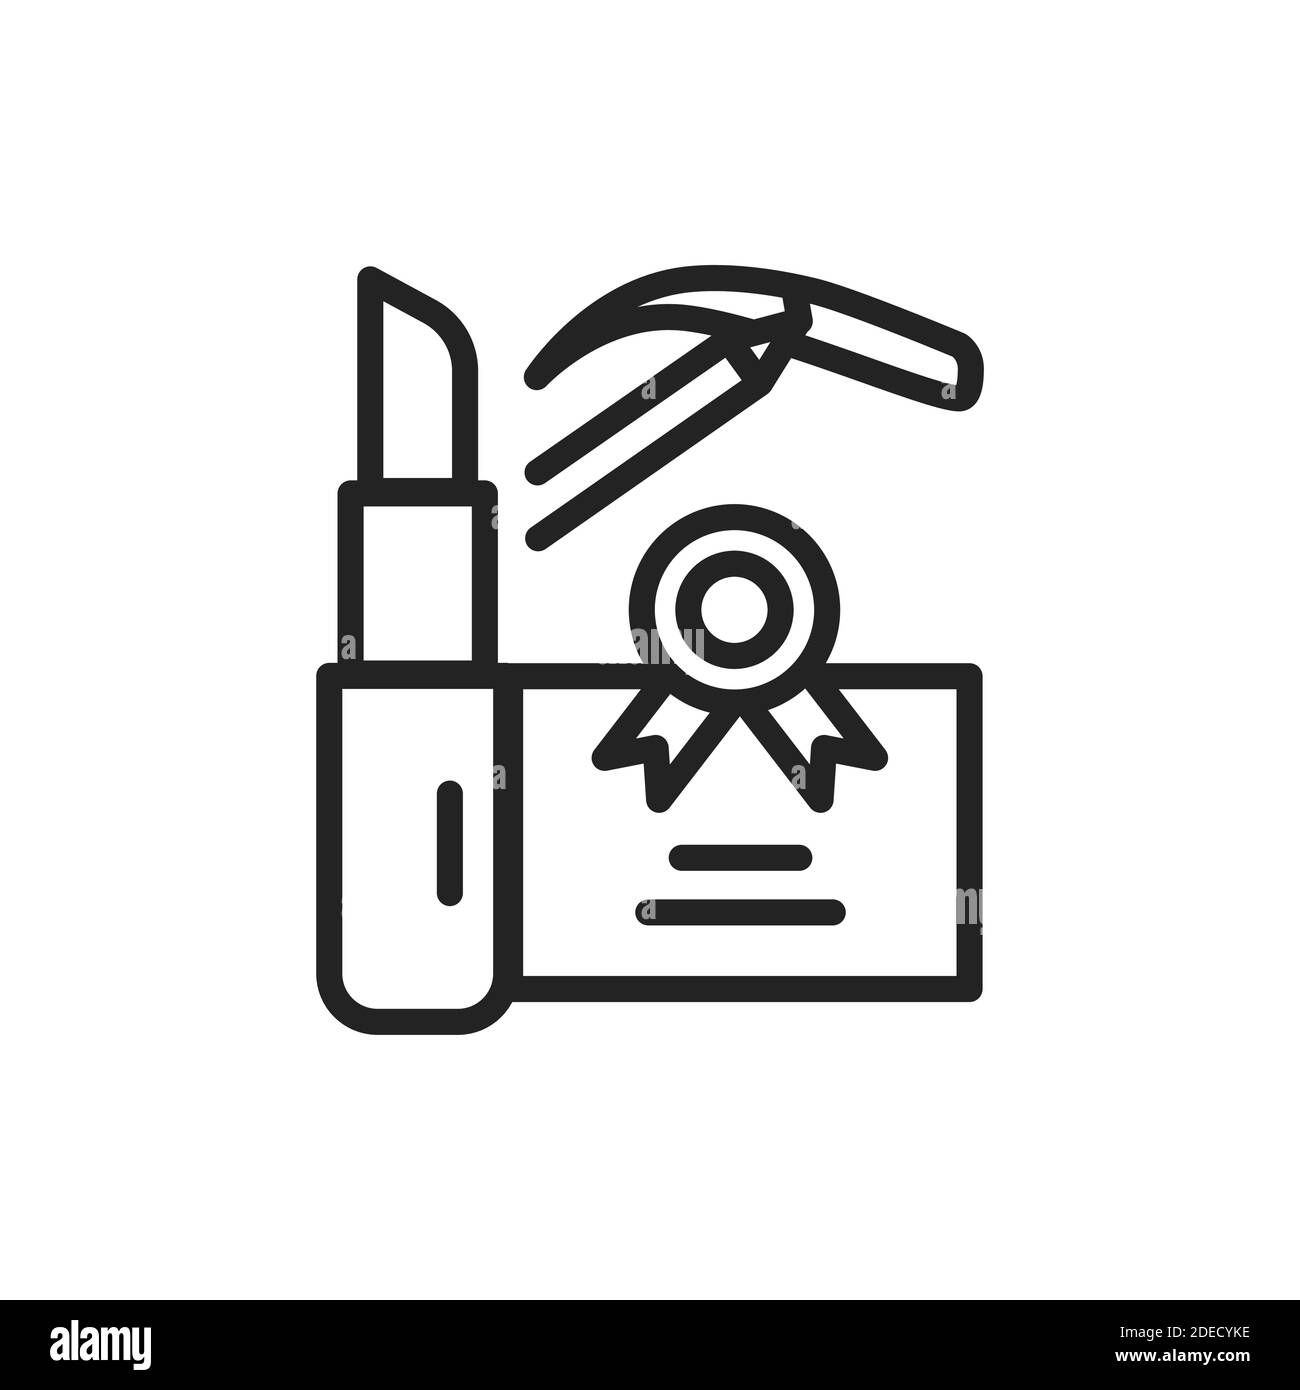 Beauty industry courses black line icon. Outline pictogram for web page, mobile app, promo. Stock Vector